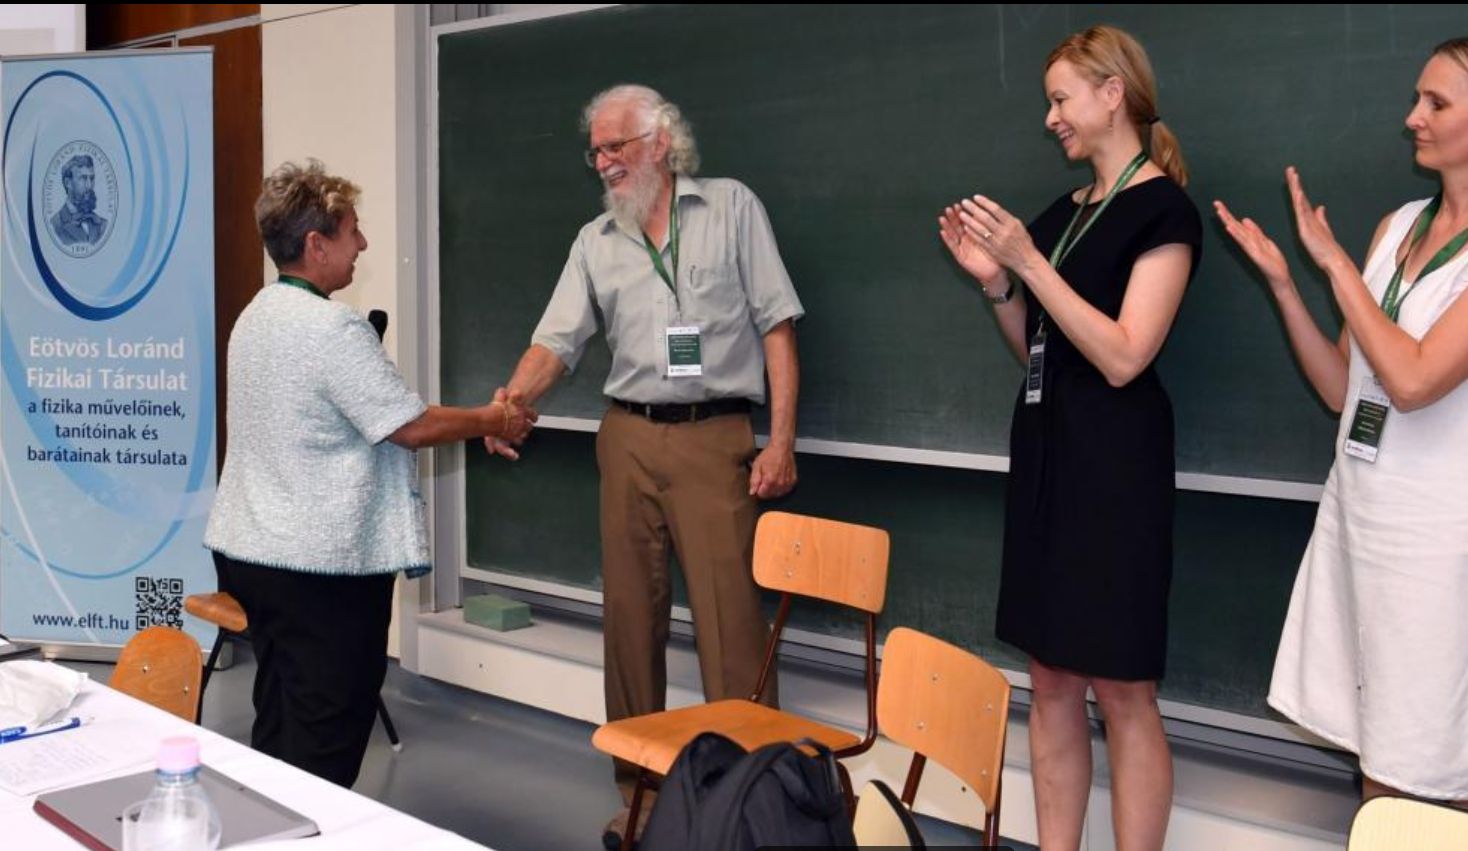 Dr. Marisa Michelini, president of GIREP and a professor at the University of Udine, Italy, congratulates Dr. Dean Zollman. Looking on are Dr. Claudia Haagen-Schuetzenhoefer, vice president of GIREP and a professor at University of Graz, Austria, and Dagmara Sokolowska, secretary of GIREP and an associate professor at Jagiellonian University, Poland.